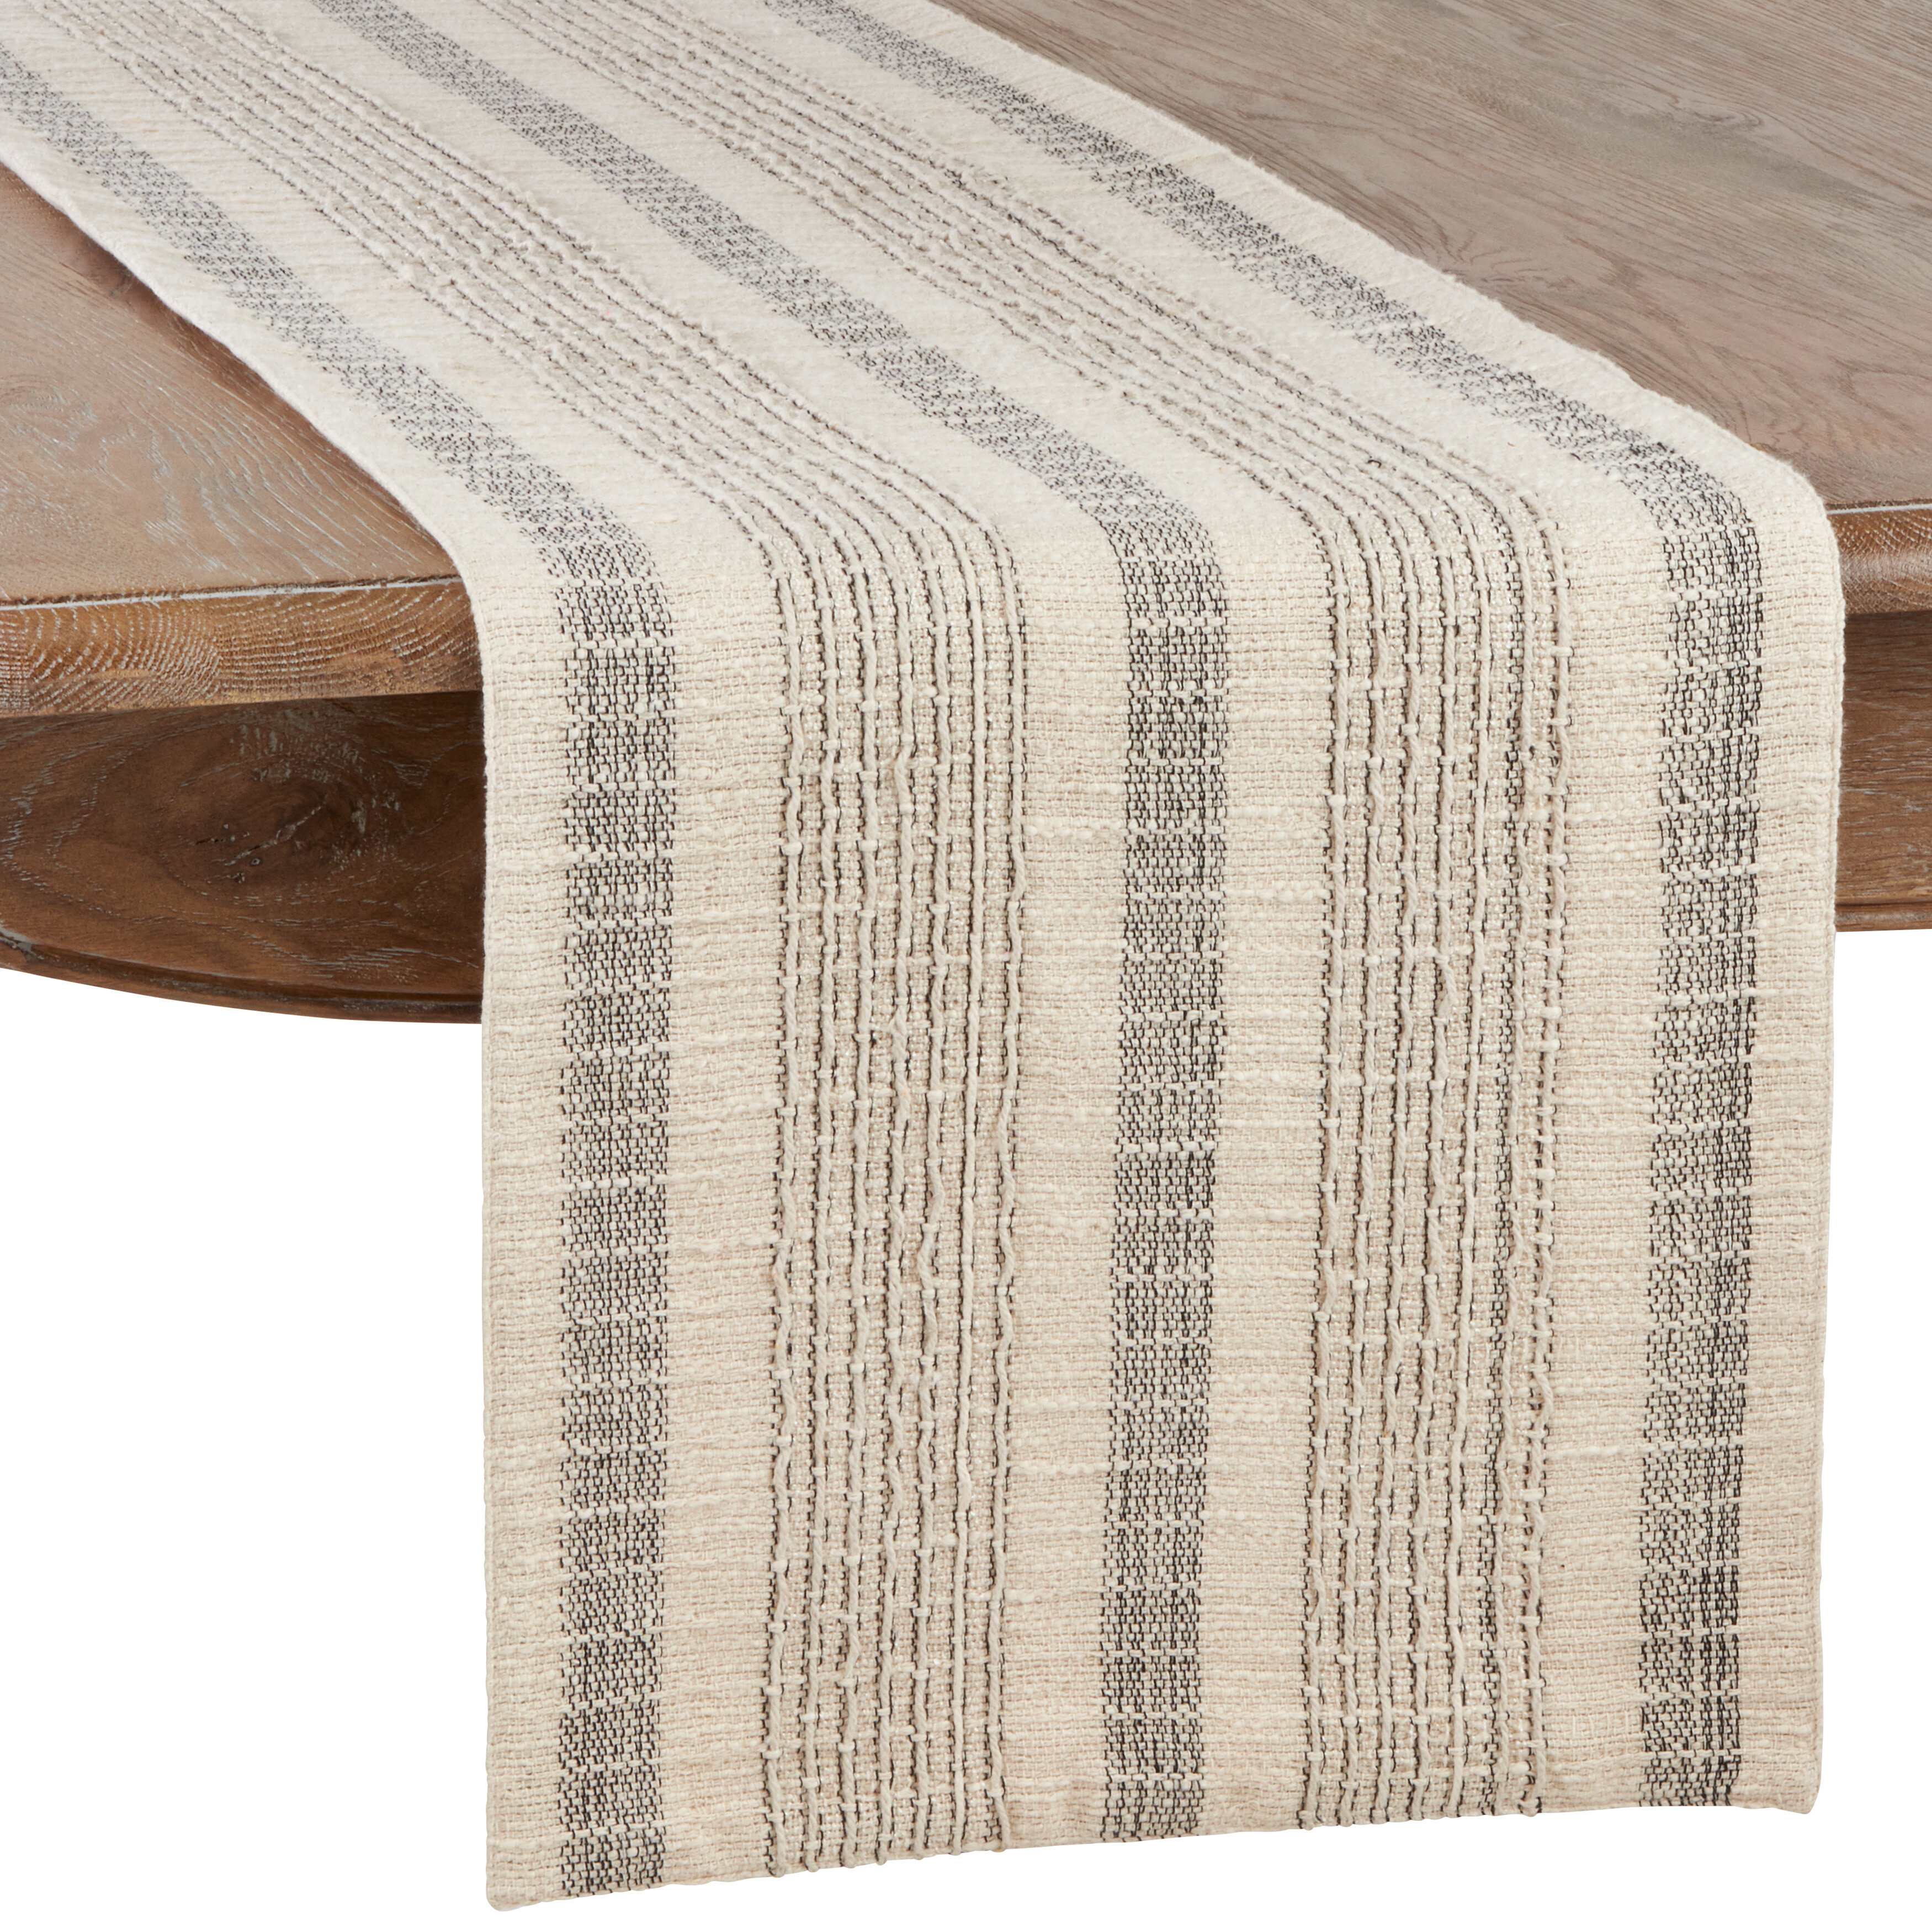 Weave a Textured Table Runner with Peggy (Kit) via Zoom